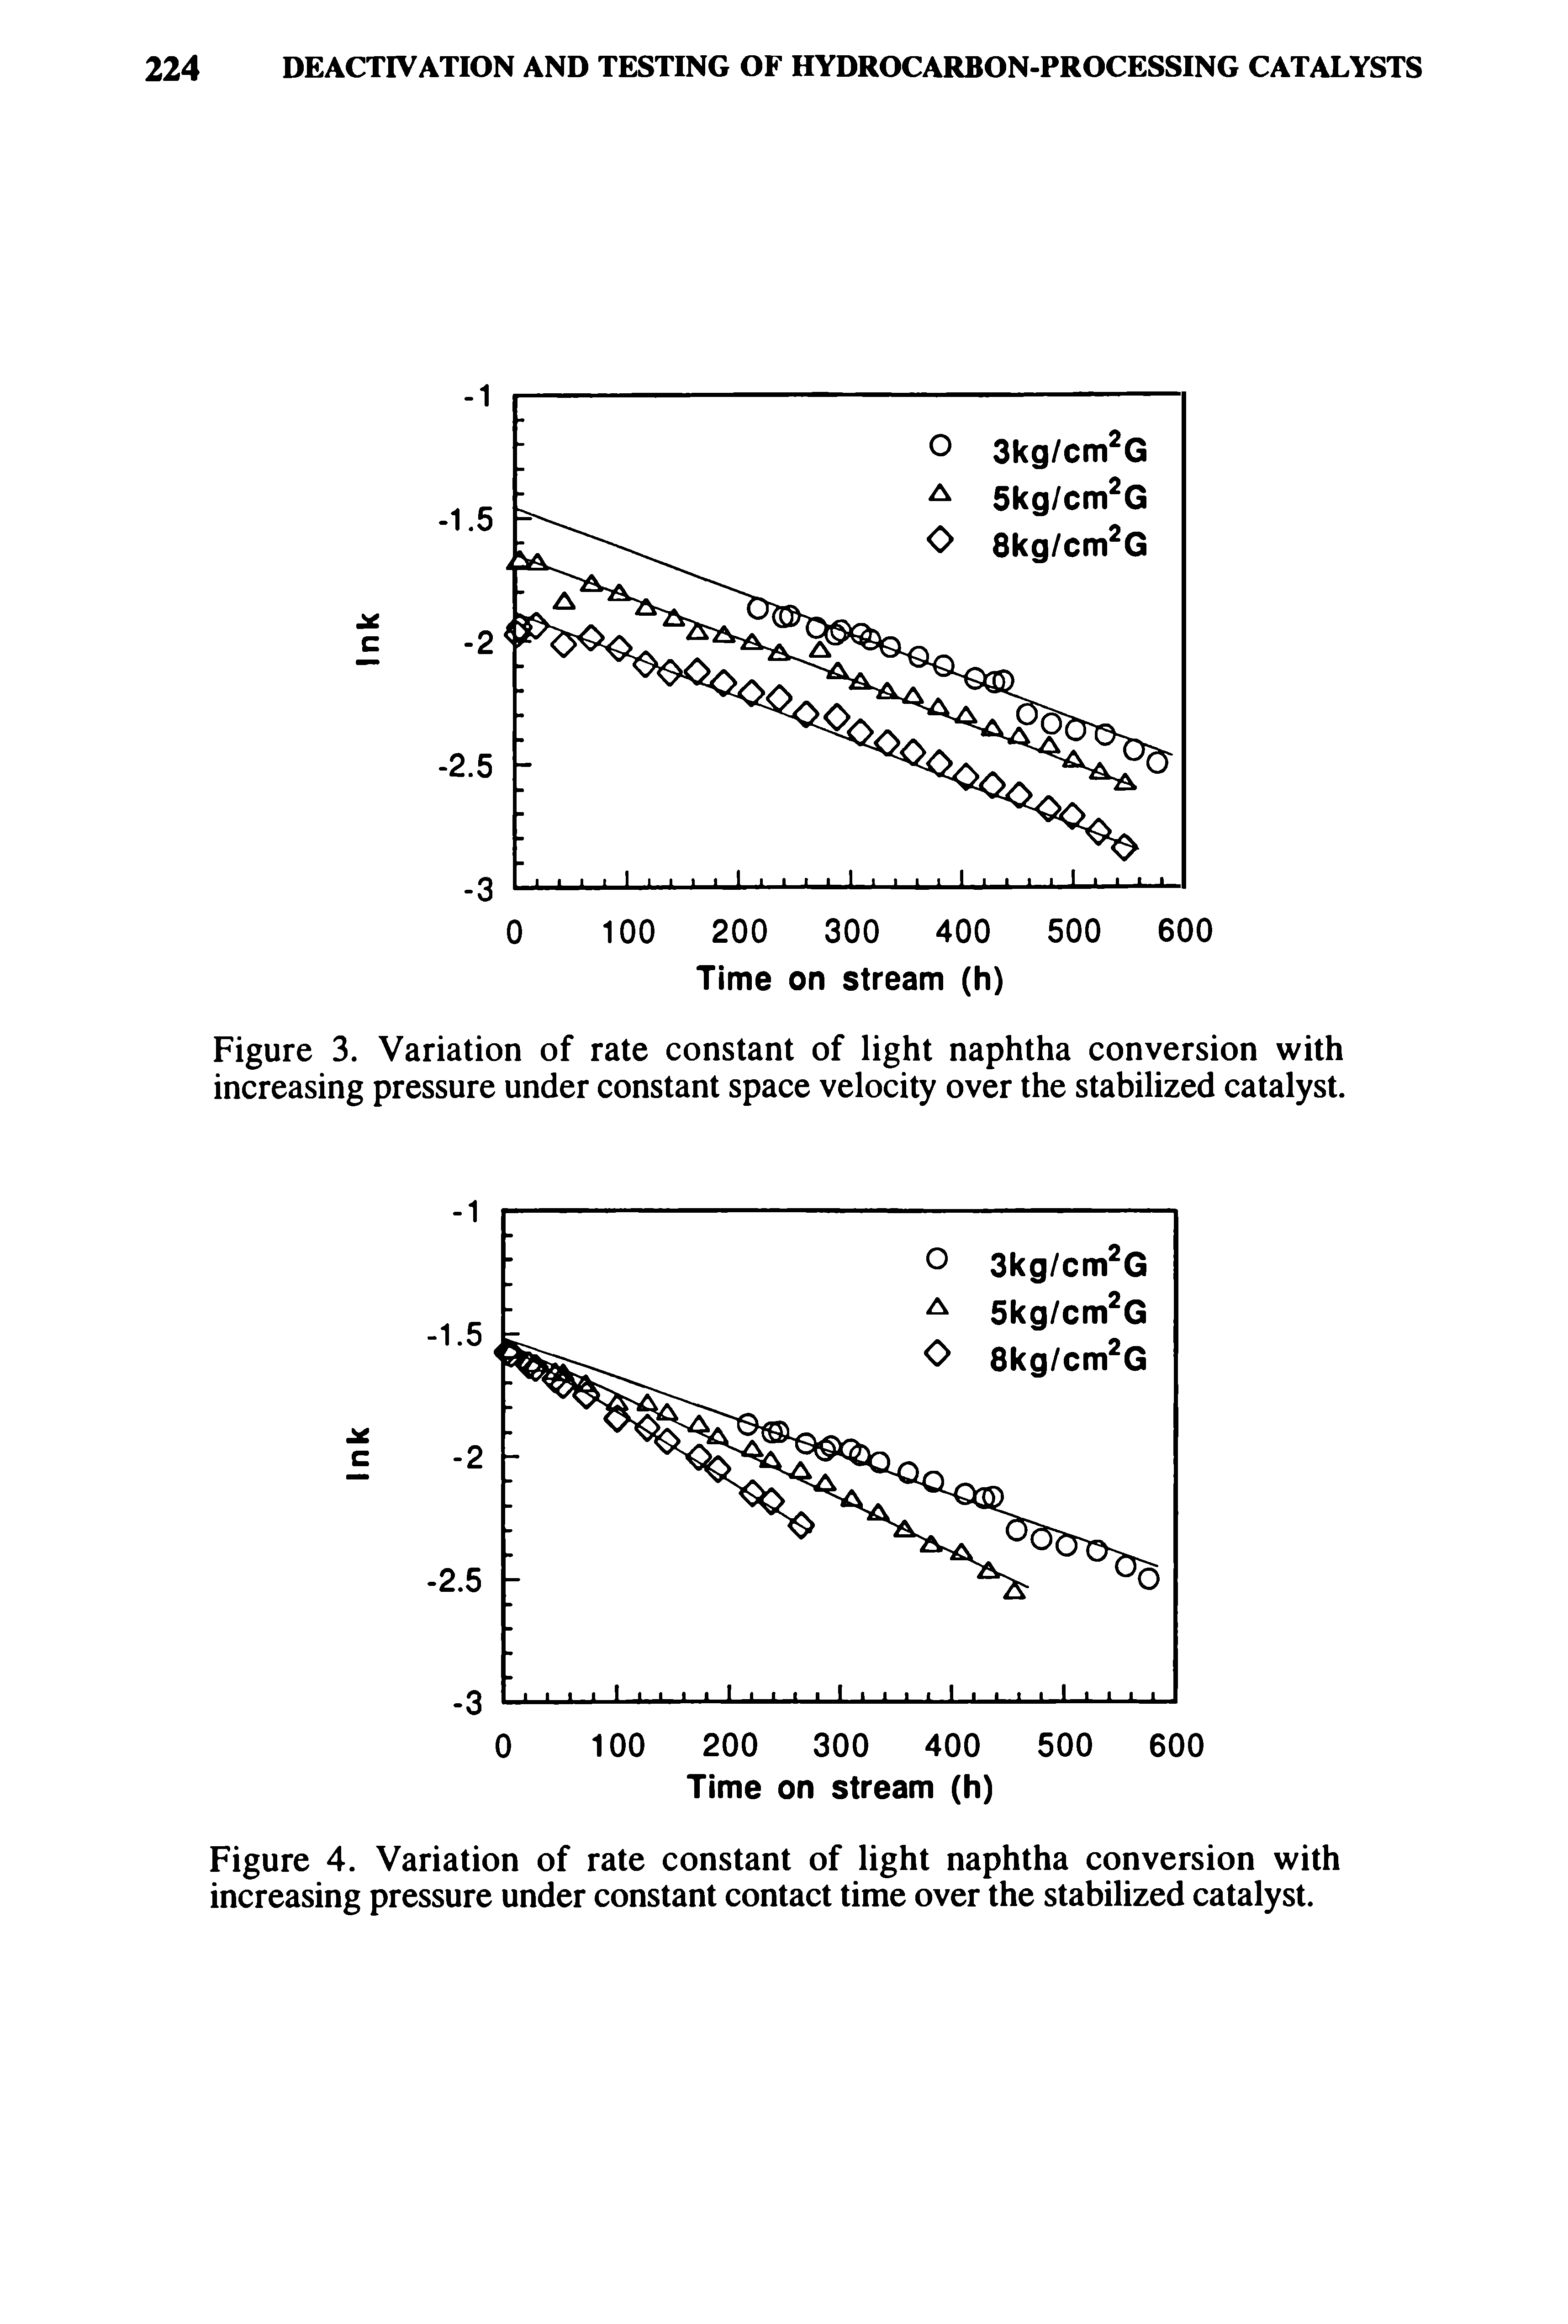 Figure 3. Variation of rate constant of light naphtha conversion with increasing pressure under constant space velocity over the stabilized catalyst.